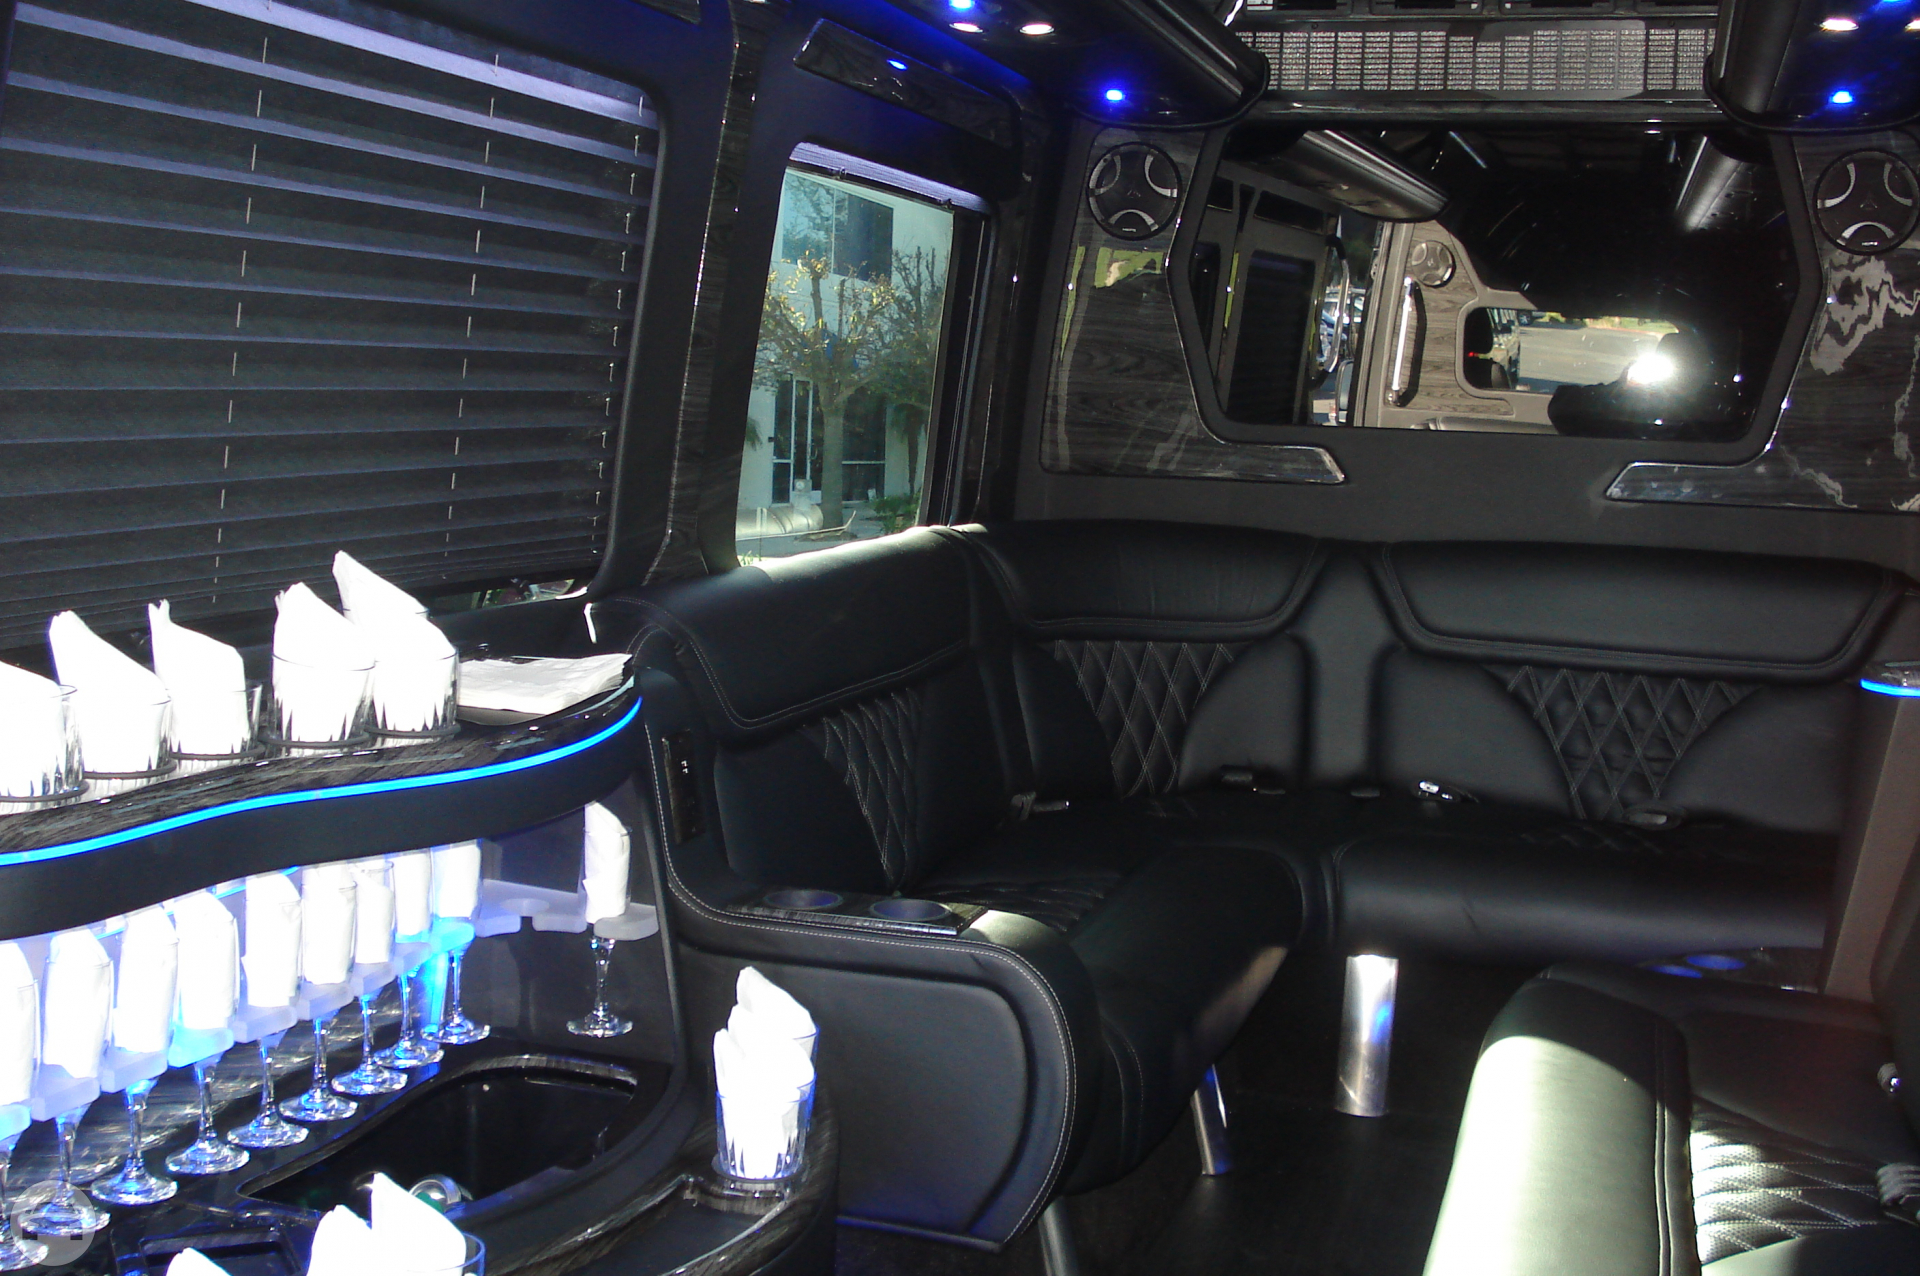 Mercedes Sprinter Limo
Party Limo Bus /
San Diego, CA

 / Hourly $0.00
